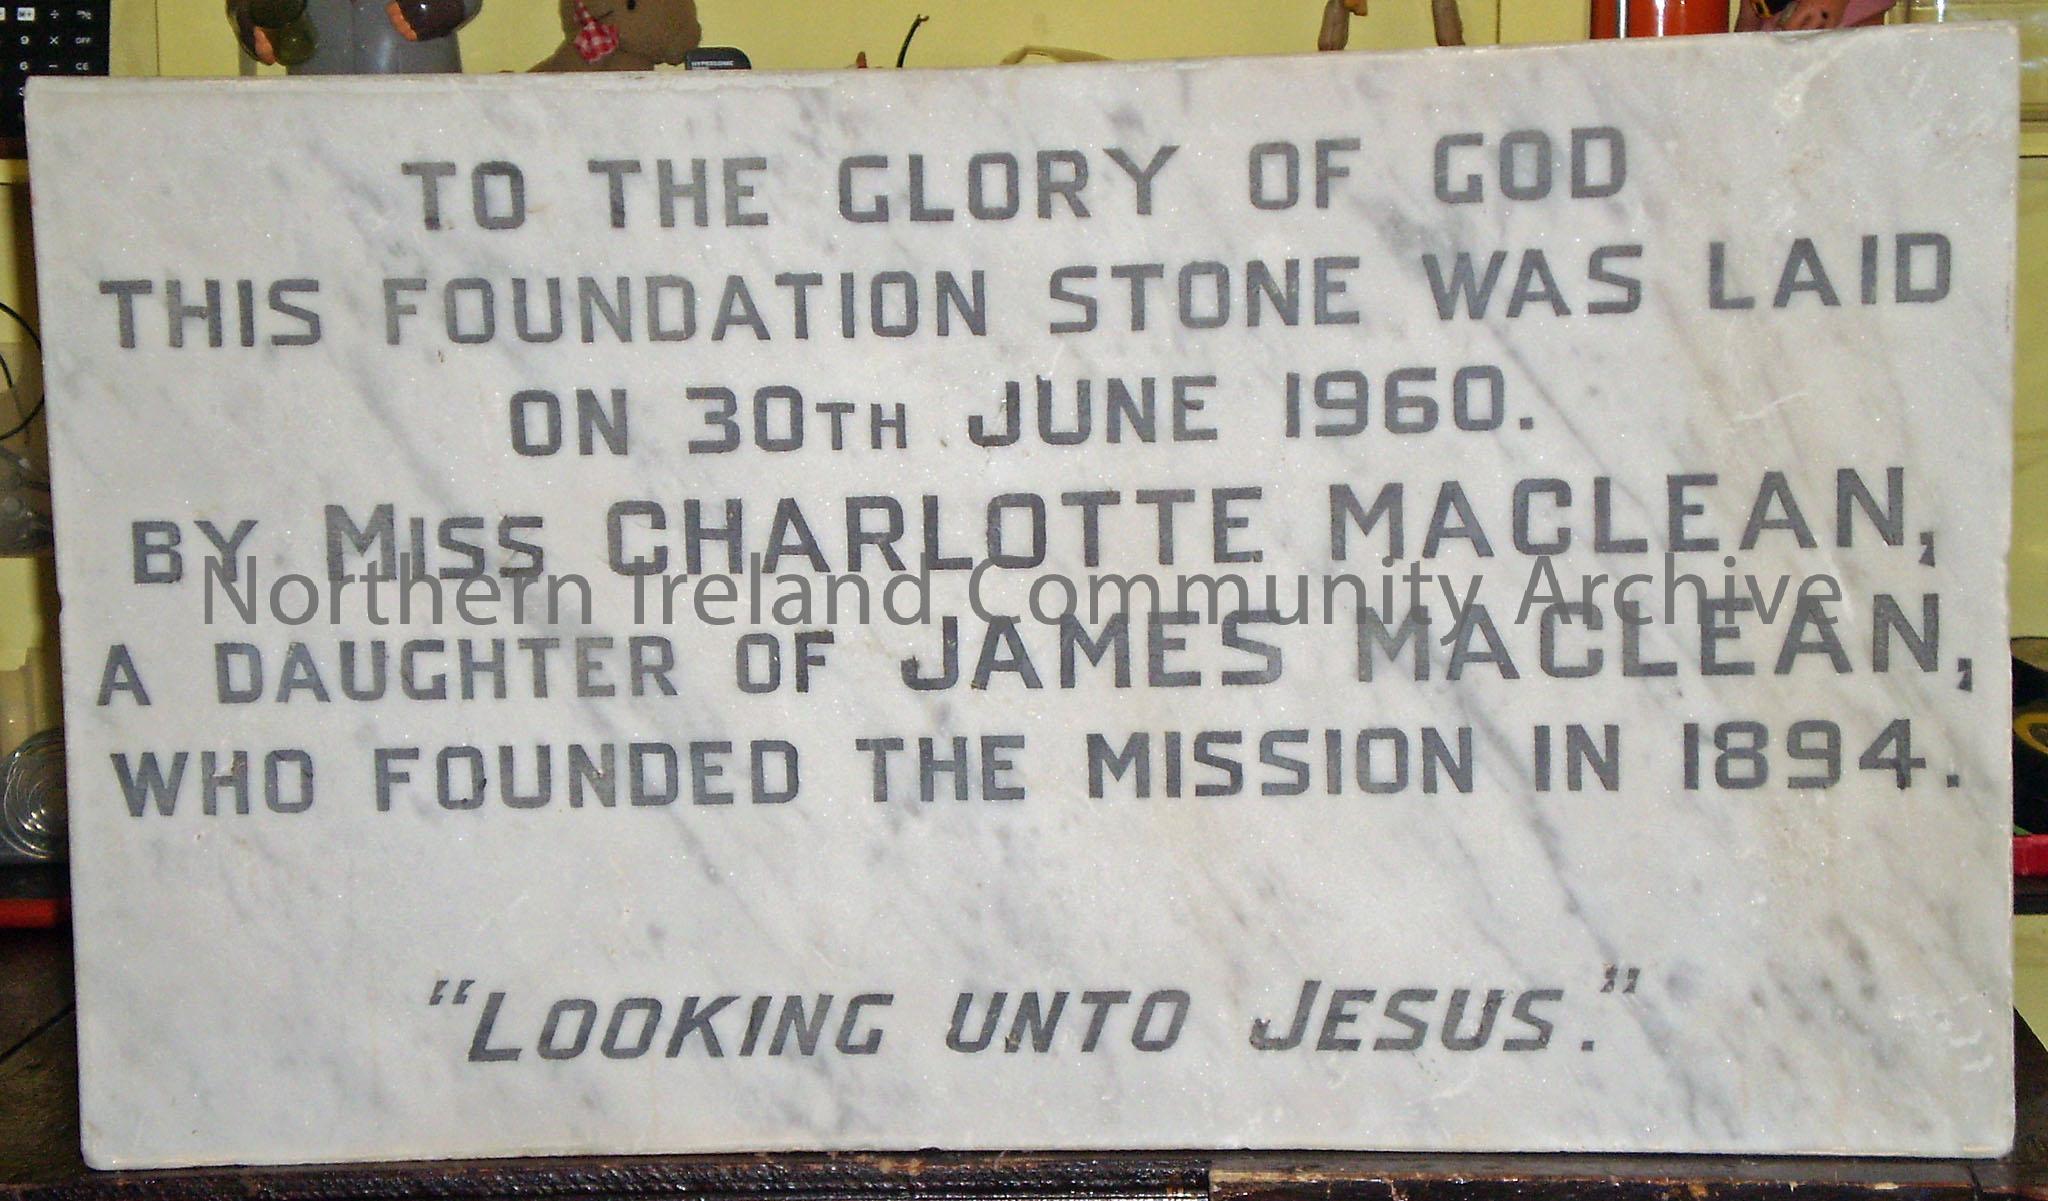 foundation stone from the Mission Church, Coleraine, founded in 1894. Stone was laid 30th June 1960.